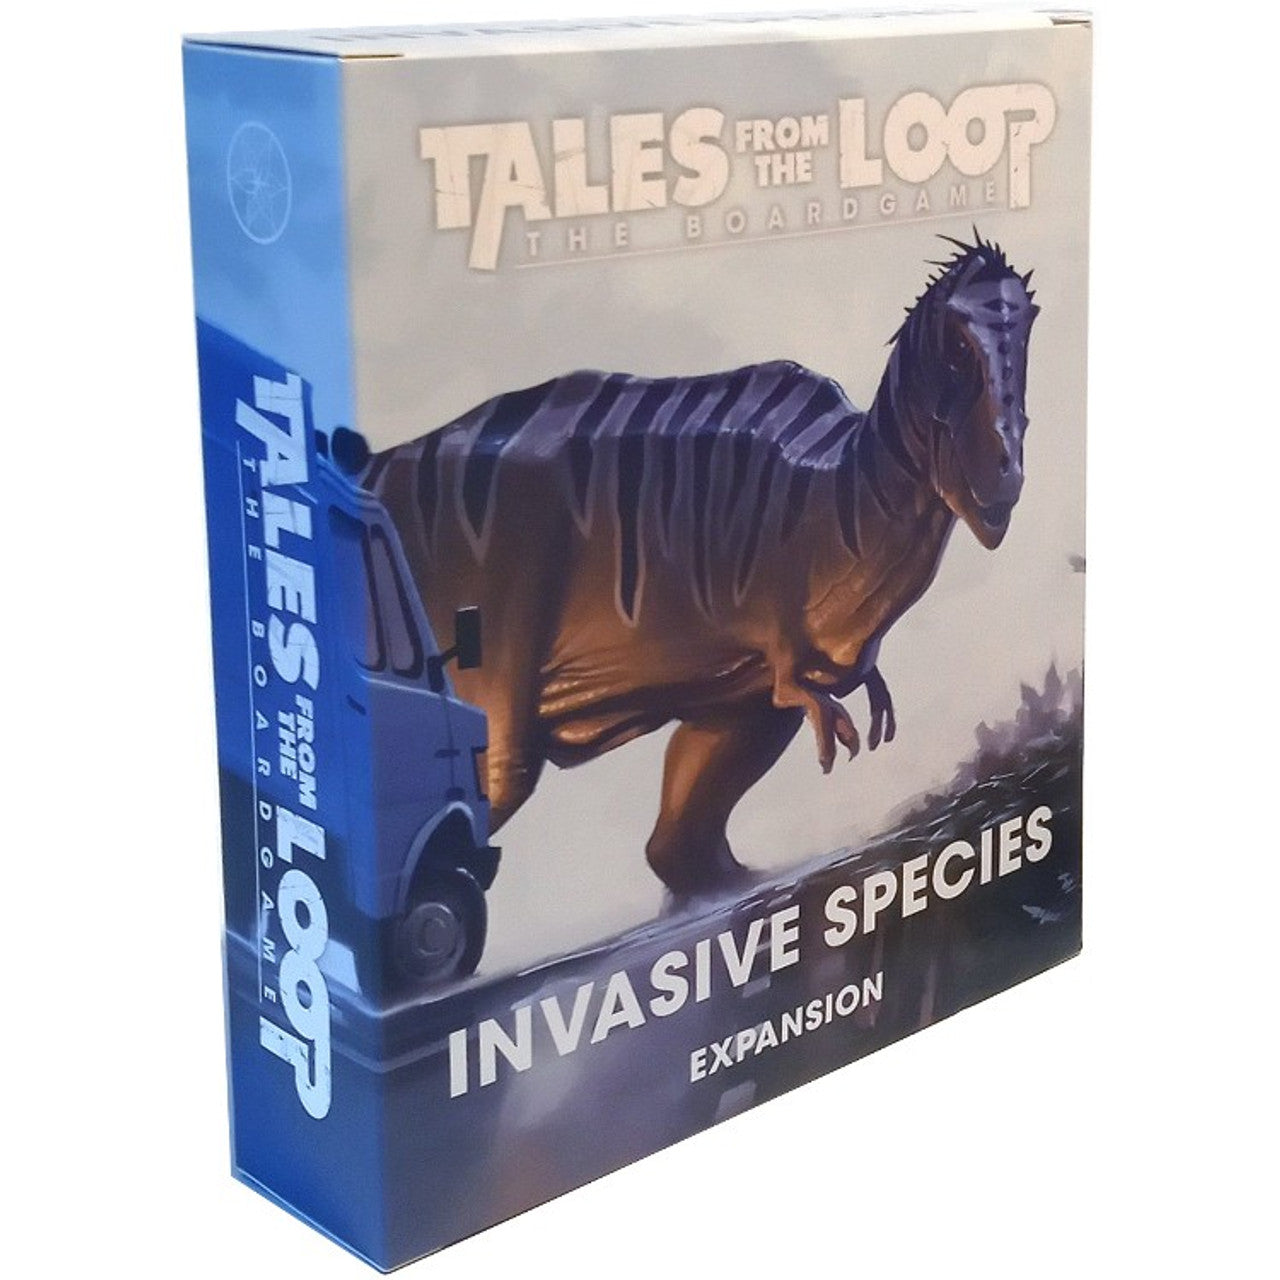 Tales From the Loop: The Board Game - Invasive Species Expansion